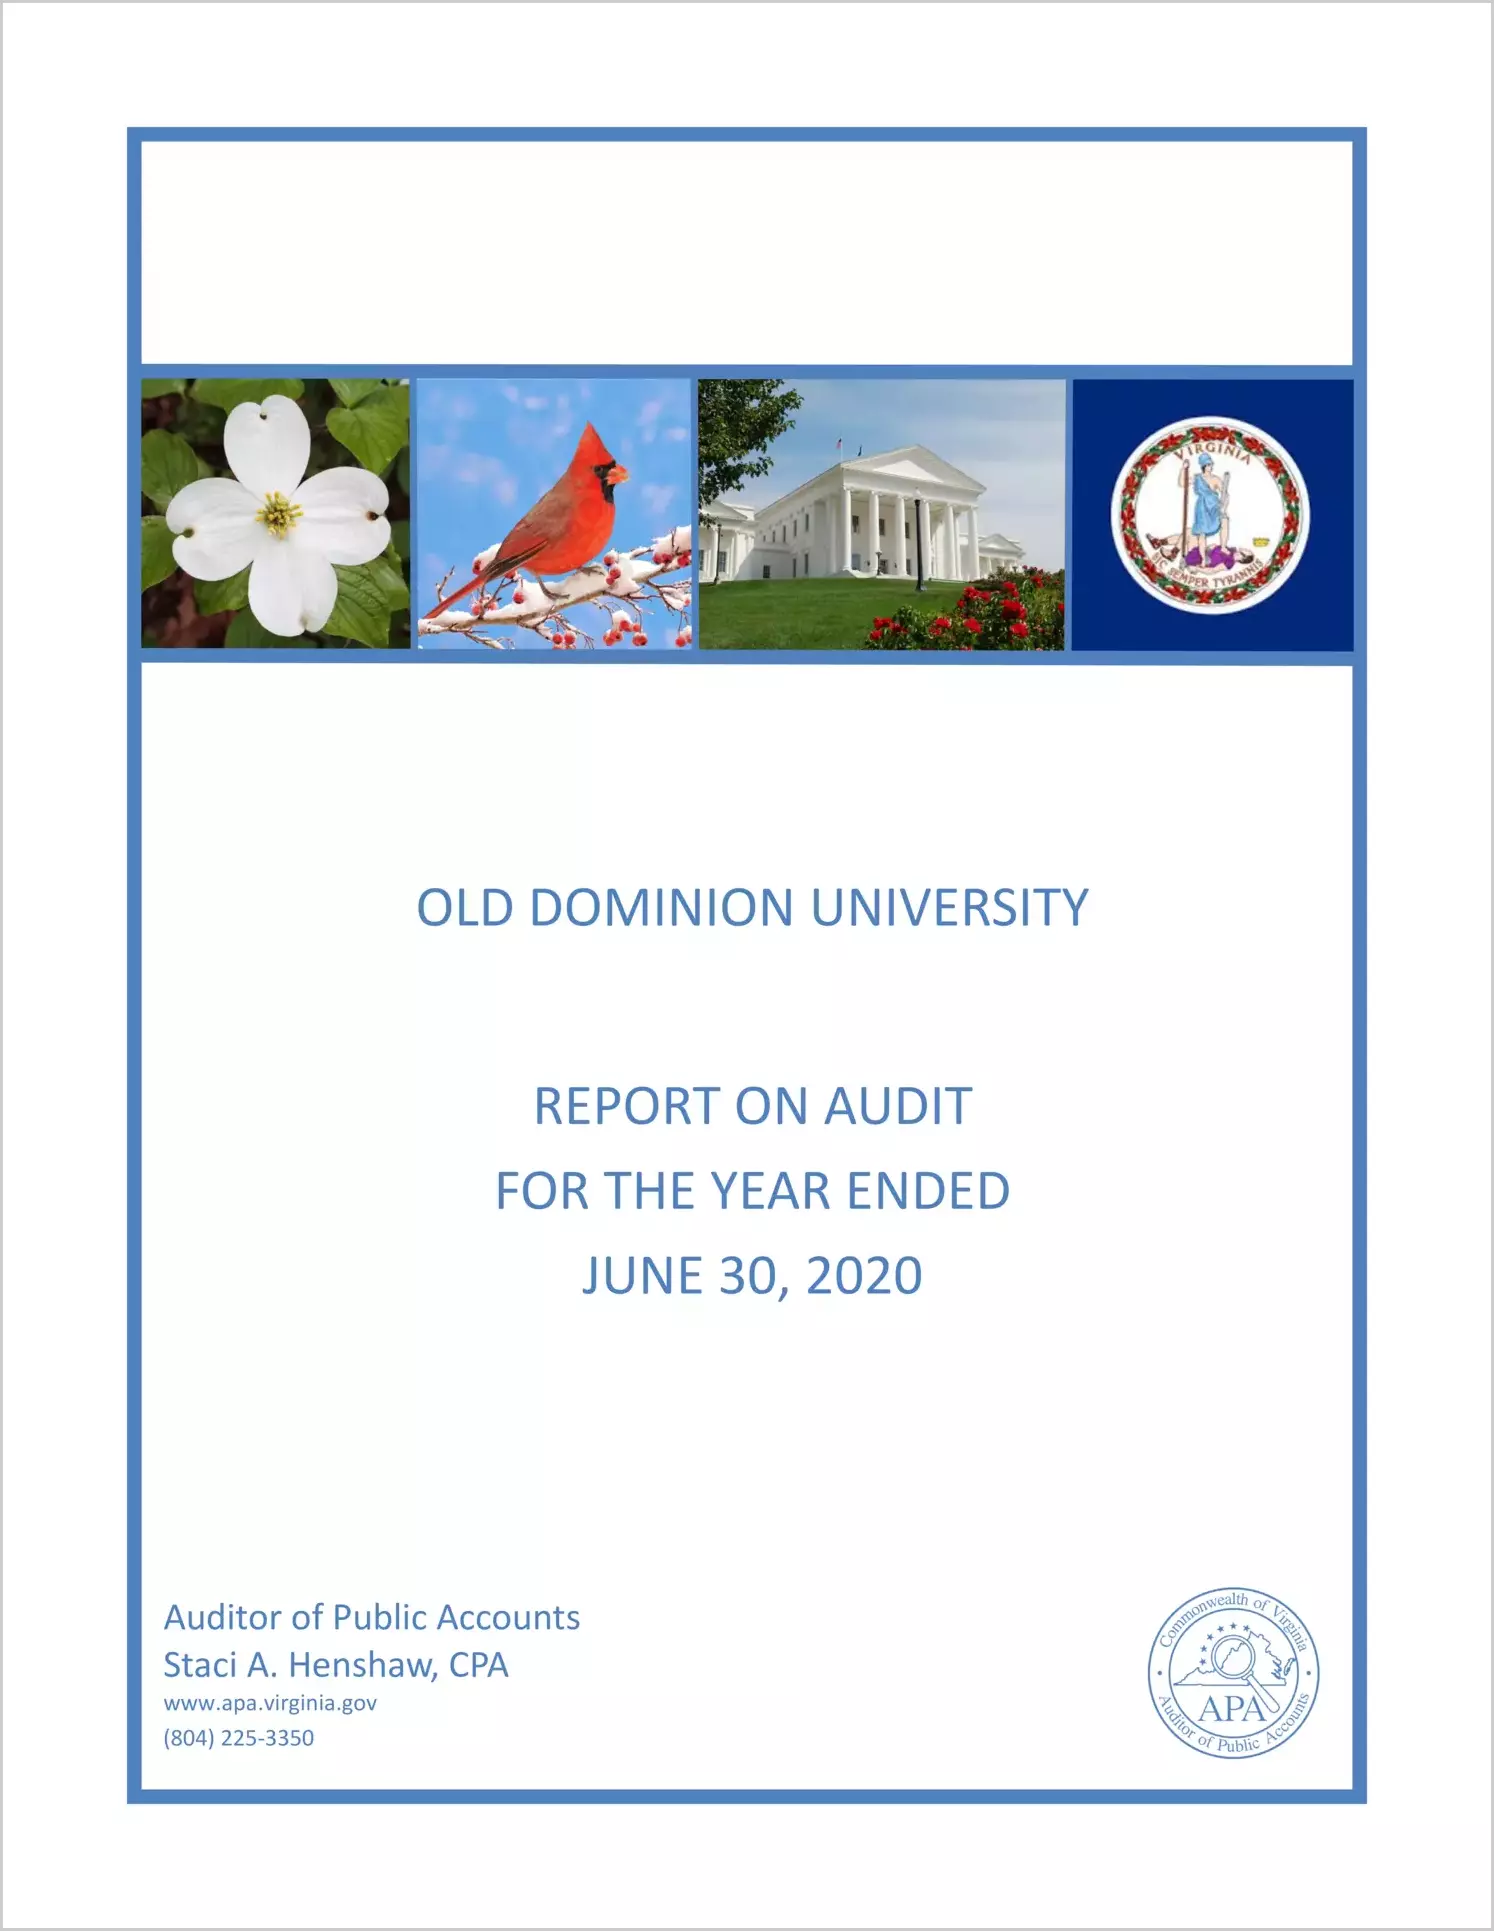 Old Dominion University for the year ended June 30, 2020